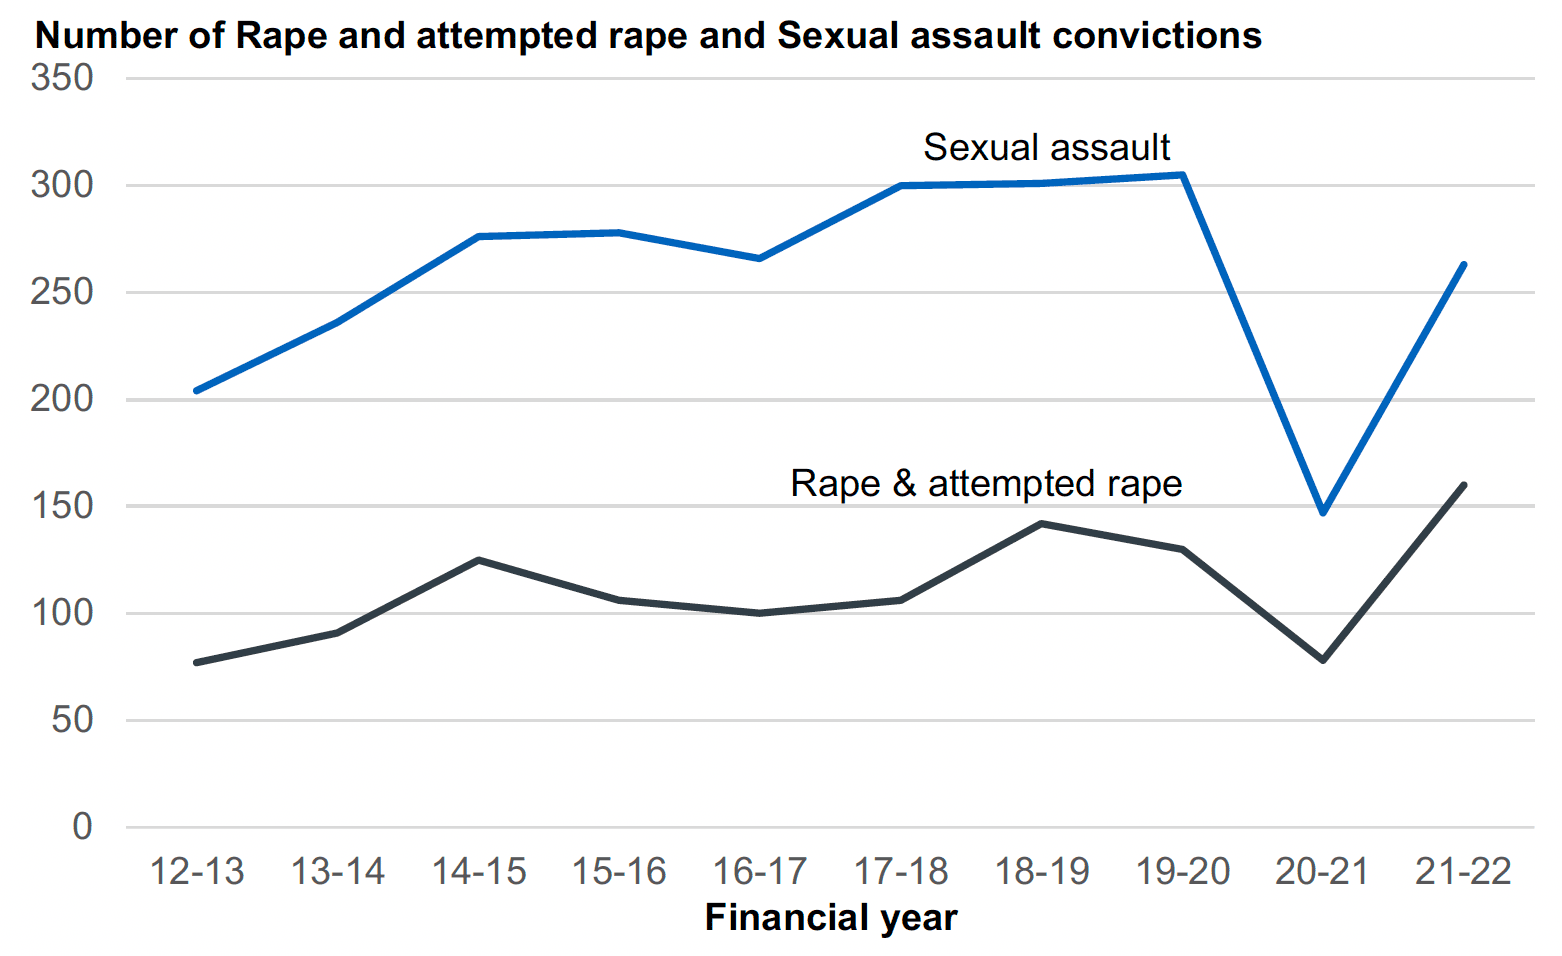 A line chart with two lines showing the number of convictions for Sexual assault, and Rape & attempted rape. Sexual assault convictions have increased from 2012-13 to 2019-20, and in 2021-22 were up 79% from the dip in 2020-21. Rape and attempted rape convictions have increased from below 100 in 2012-13 to a 10 year high of over 150 in 2021-22, an increase from the 2020-21 dip.